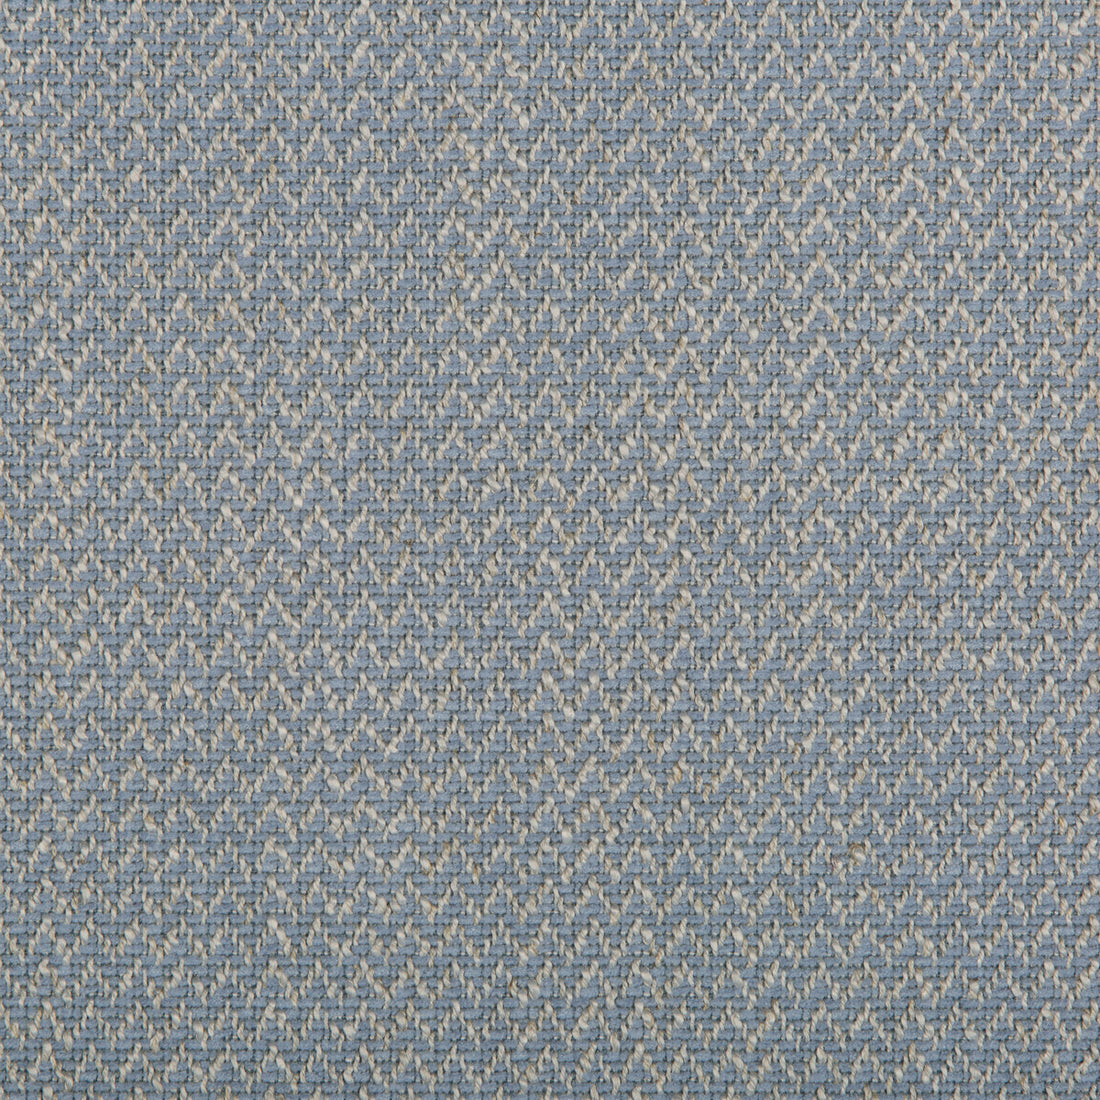 Kravet Smart fabric in 35394-5 color - pattern 35394.5.0 - by Kravet Smart in the Performance Crypton Home collection